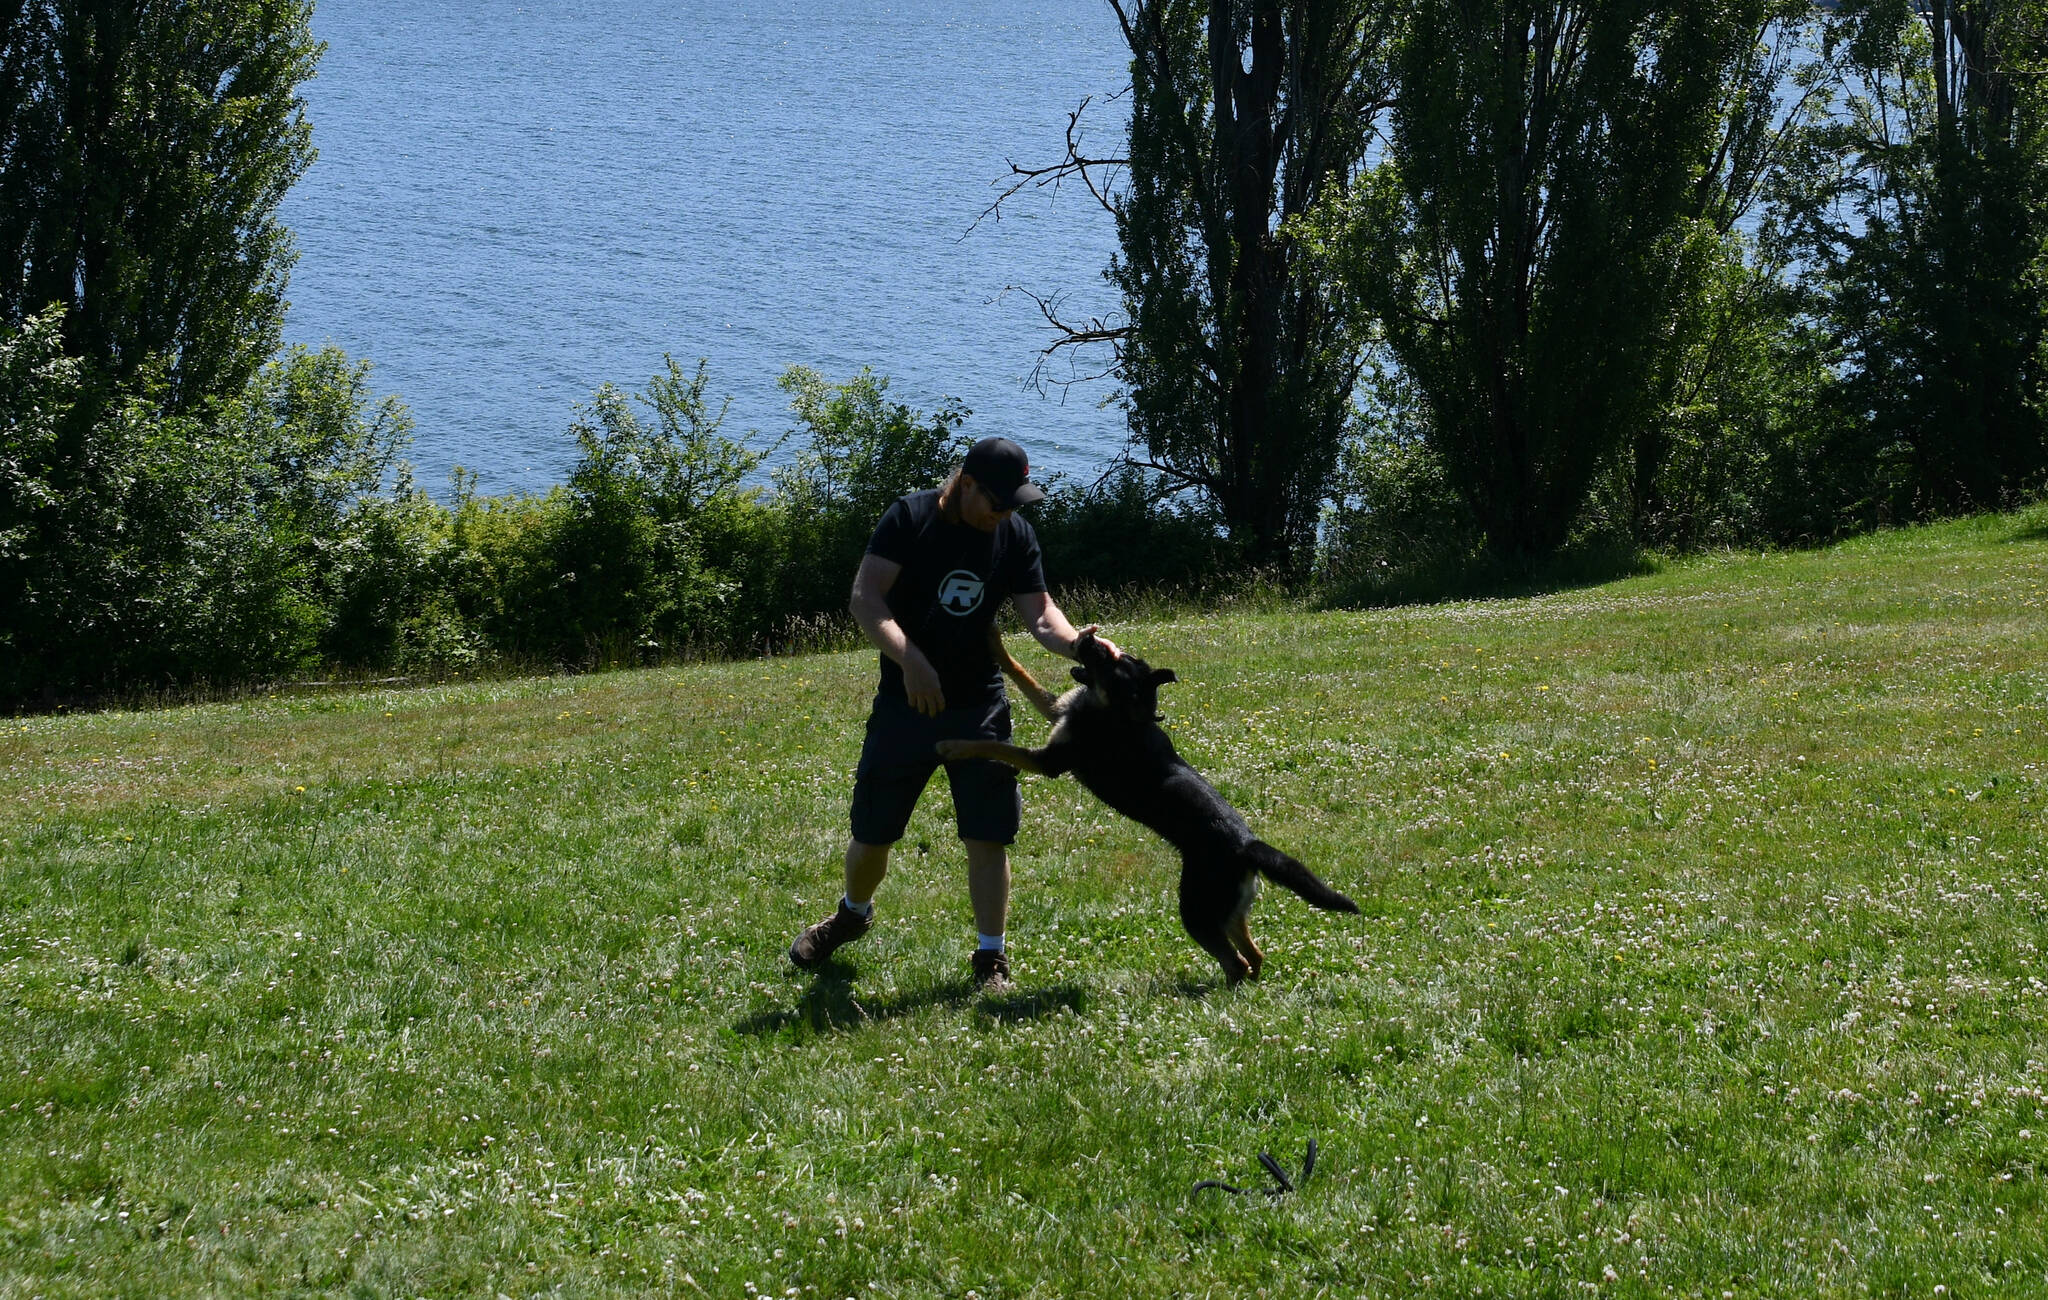 Duncan Redman plays with his German shepherd Lizzy on June 4 at Luther Burbank Park. Andy Nystrom/ staff photo